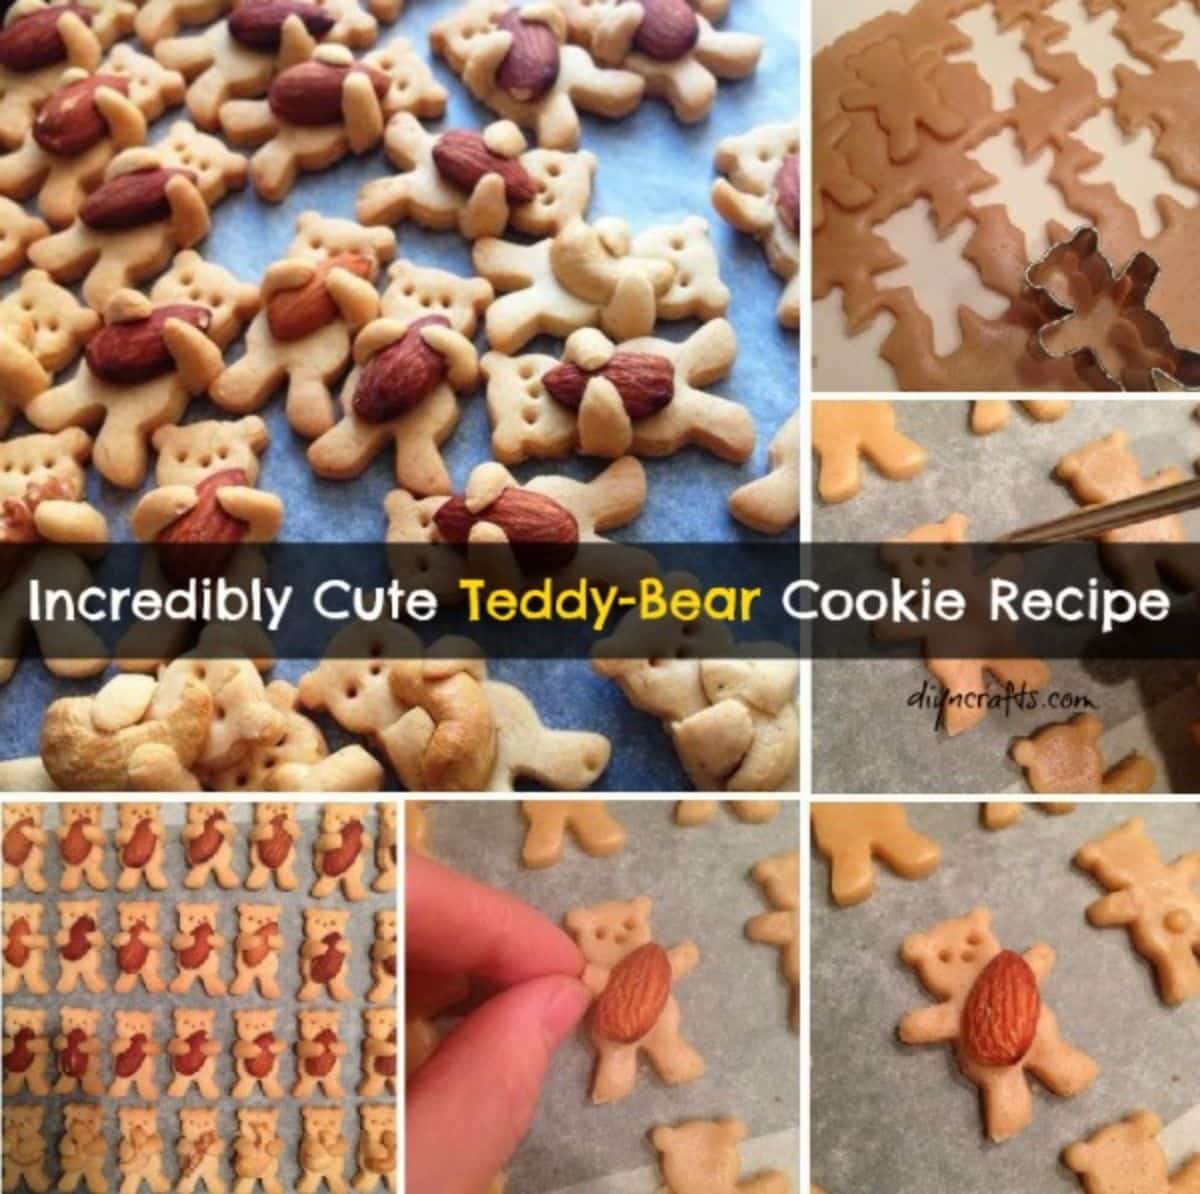 Incredibly Cute Teddy-Bear Cookie Recipe You Won’t be Able to Resist collage.